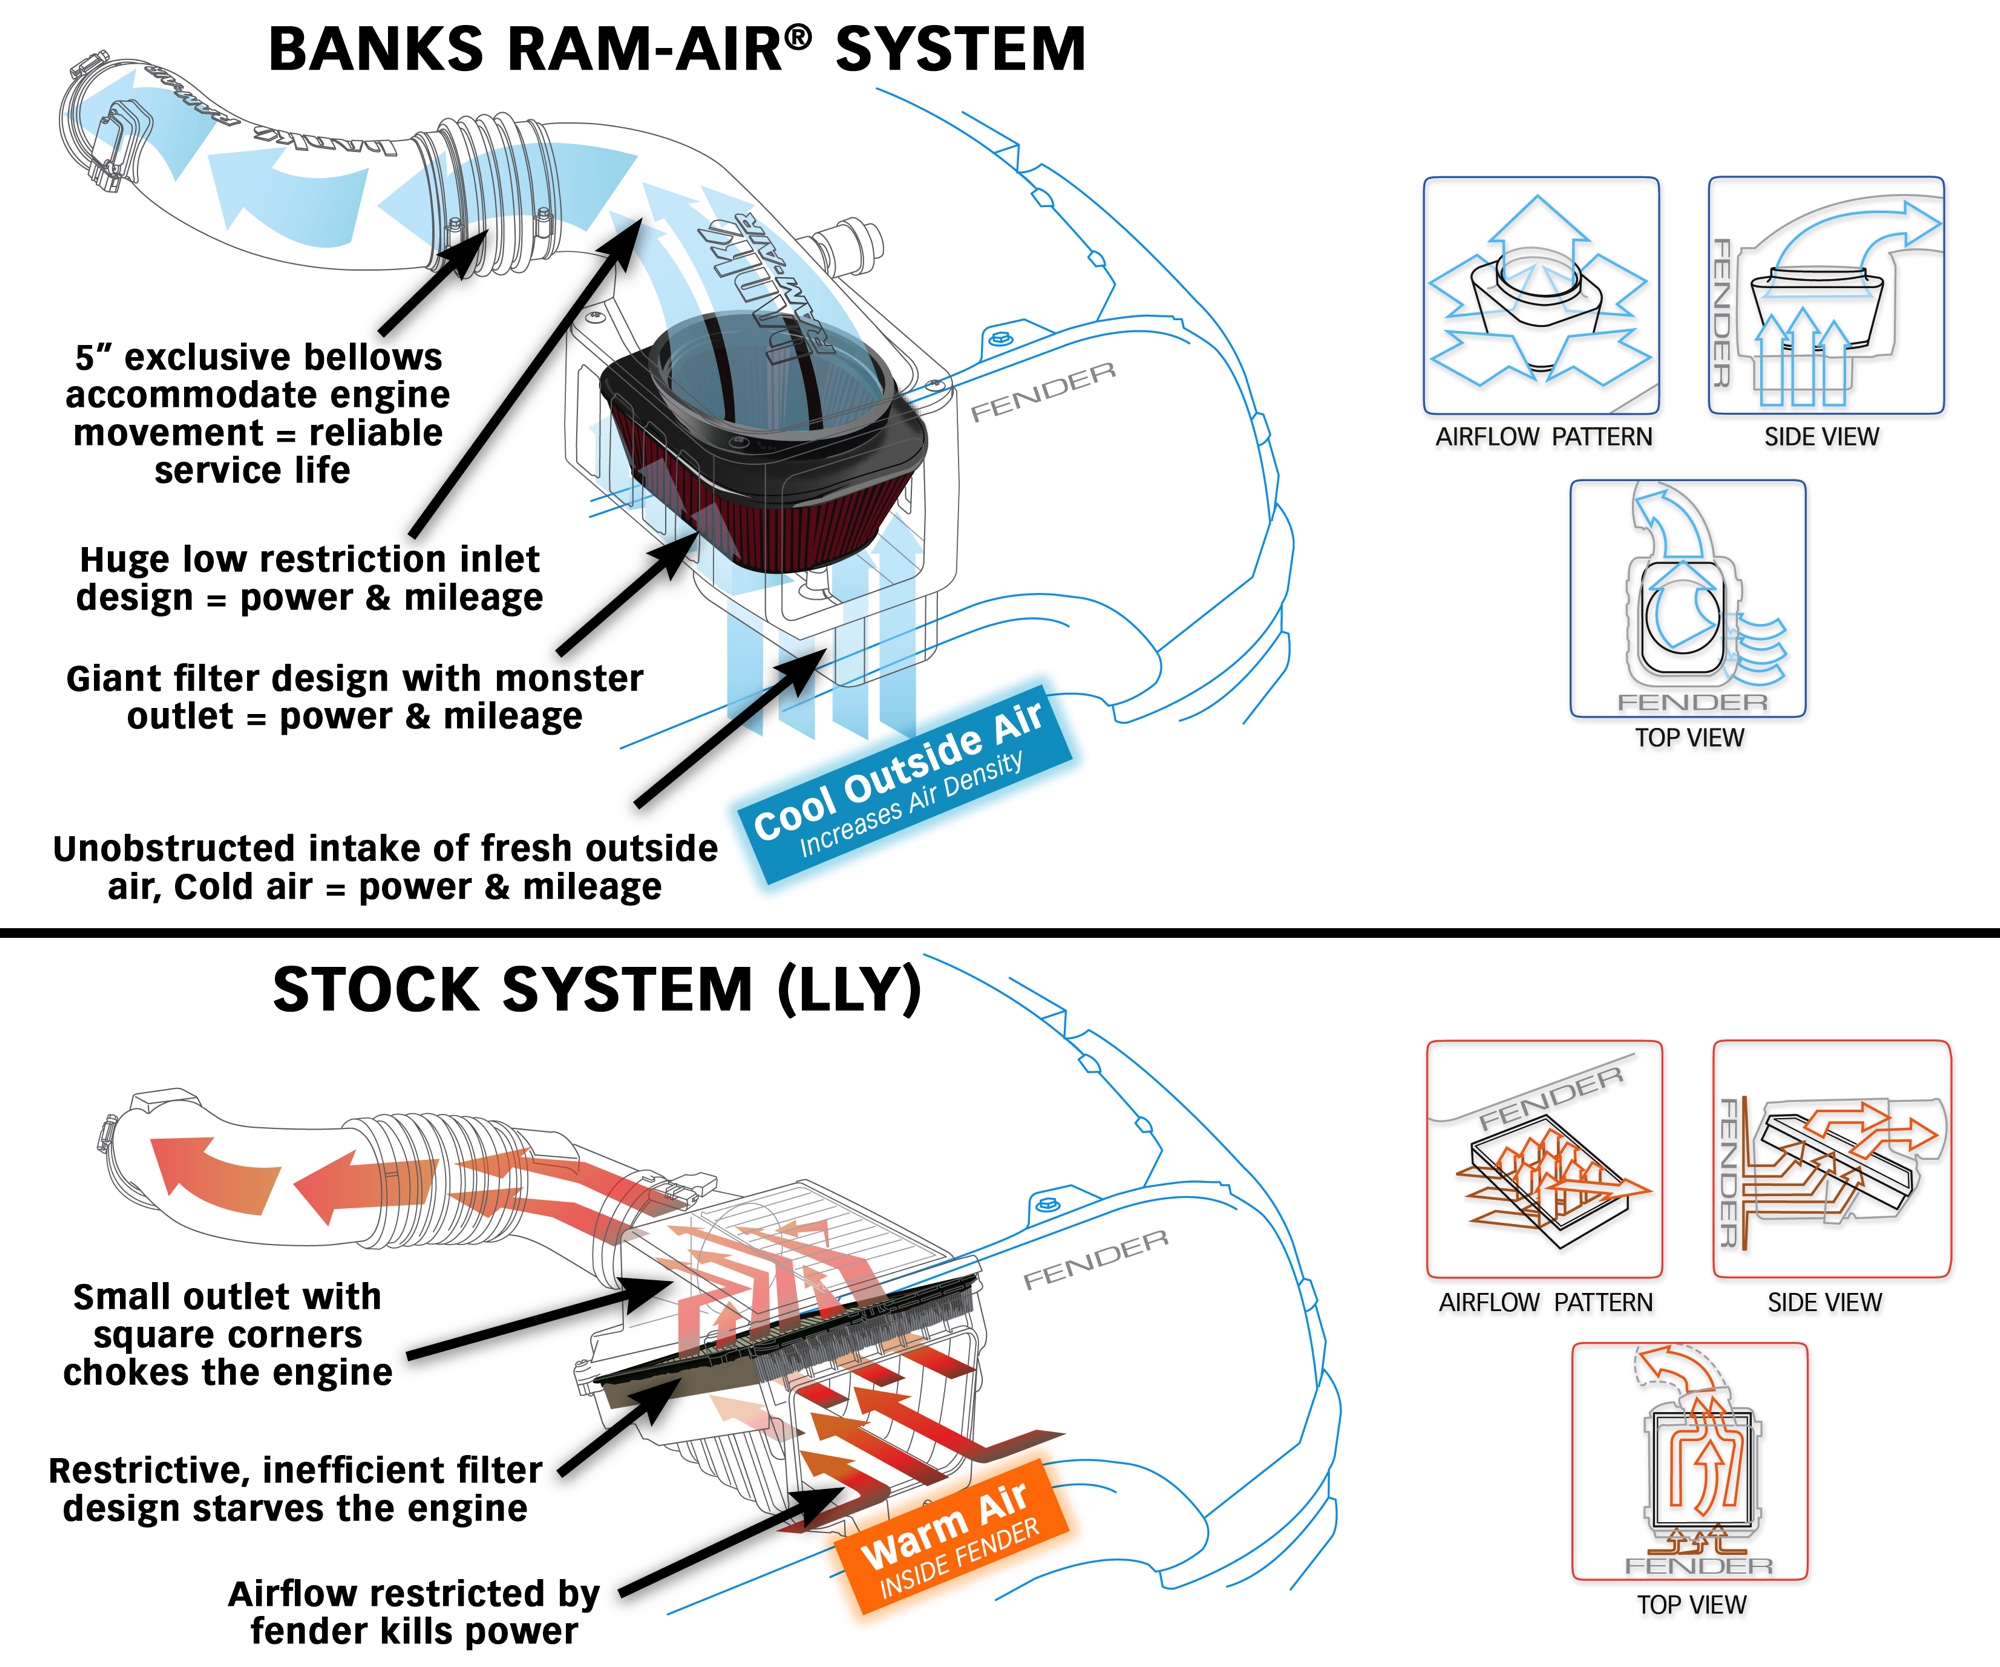 line drawing diagram showing beneficial airflow with the Banks Ram-Air system compared to stock